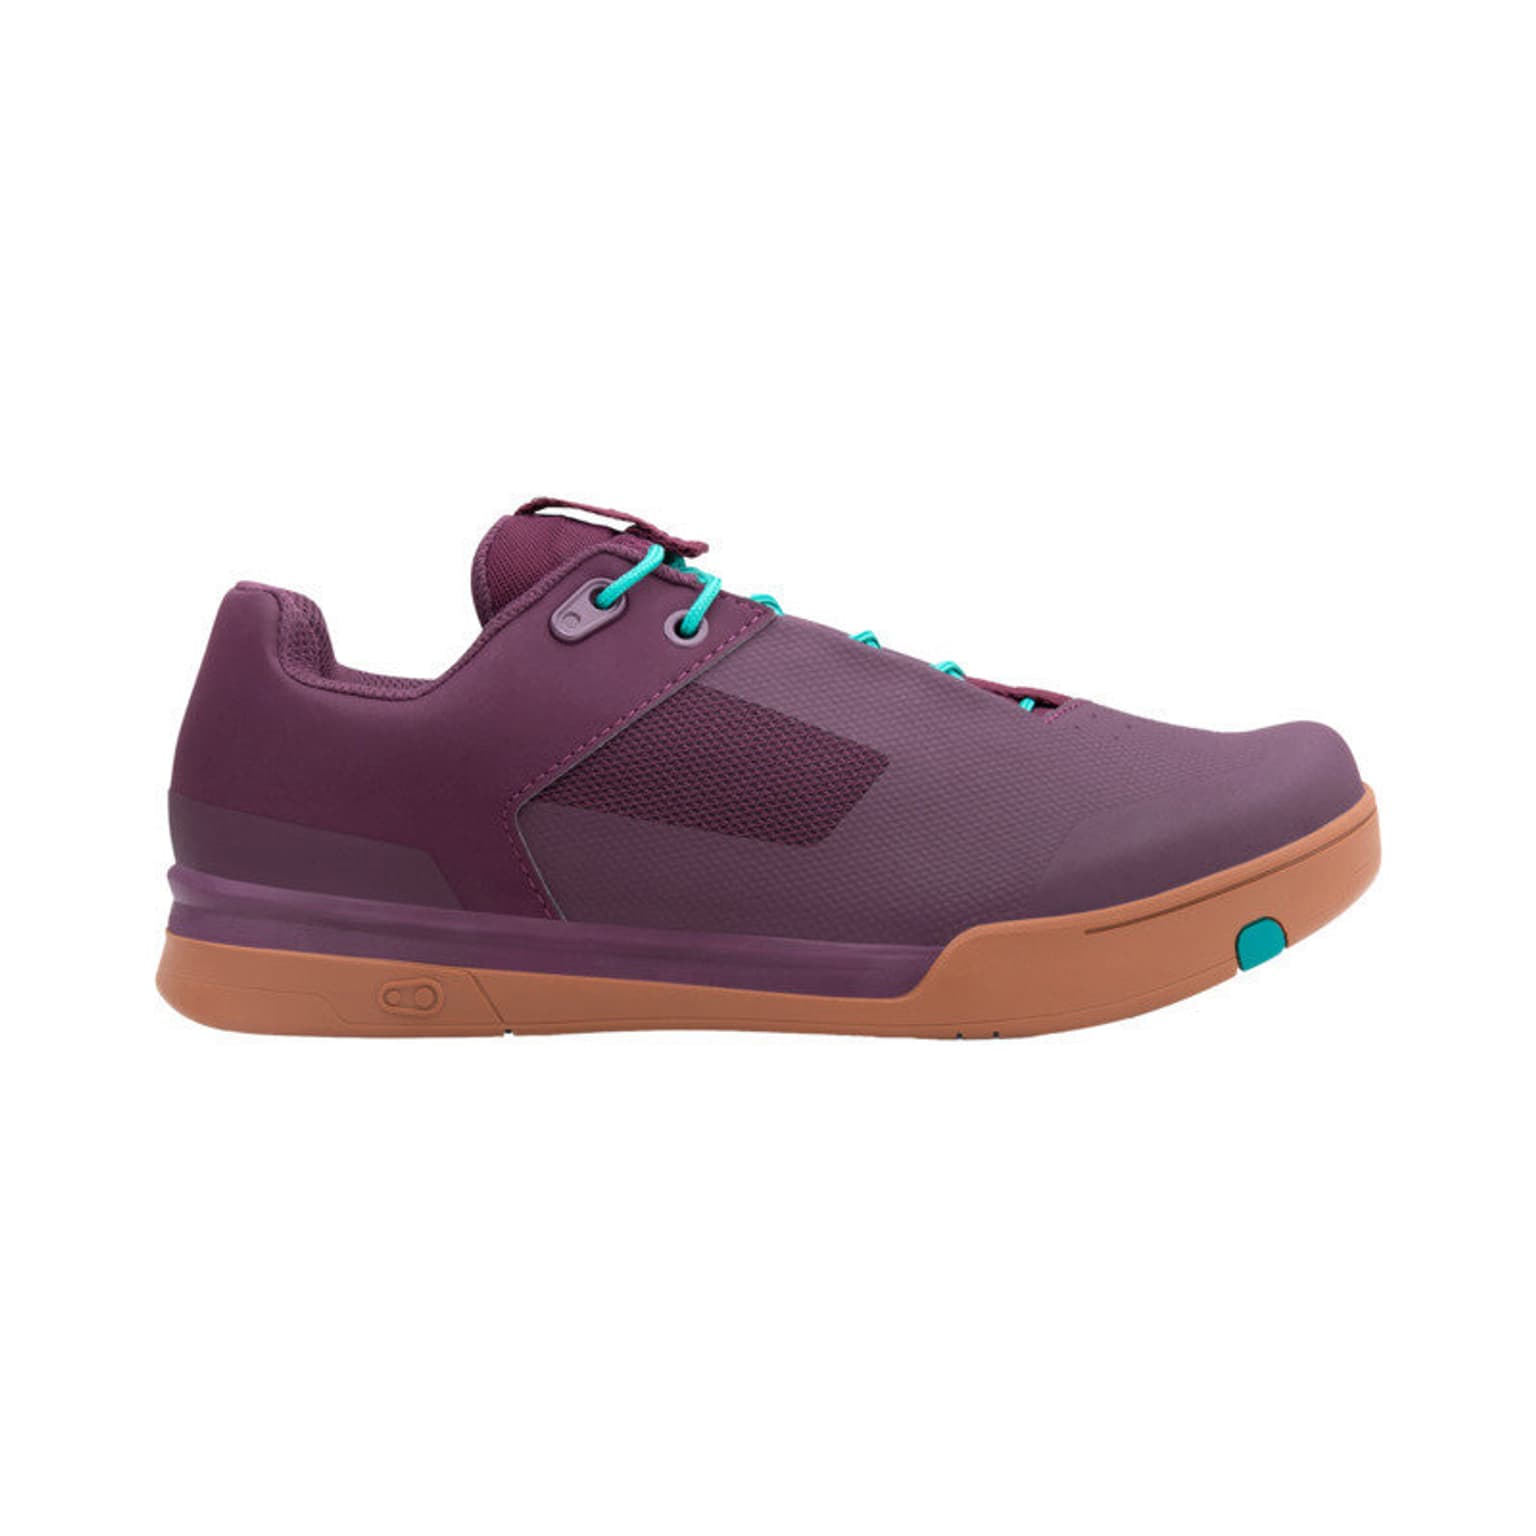 crankbrothers crankbrothers Mallet Lace Chaussures de cyclisme aubergine 1